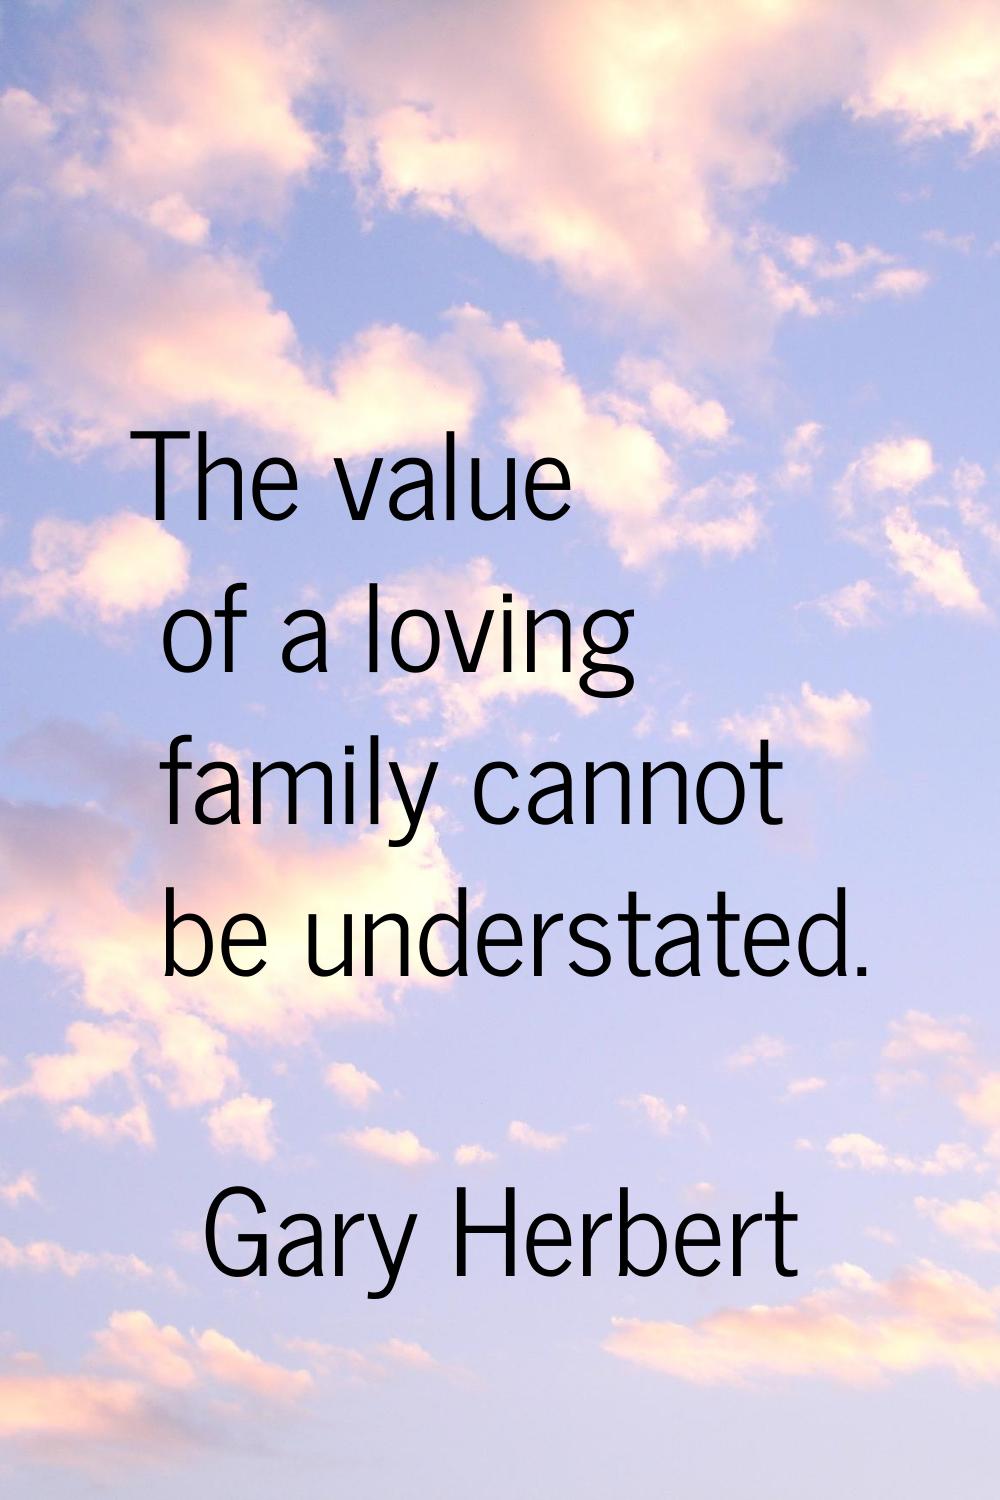 The value of a loving family cannot be understated.